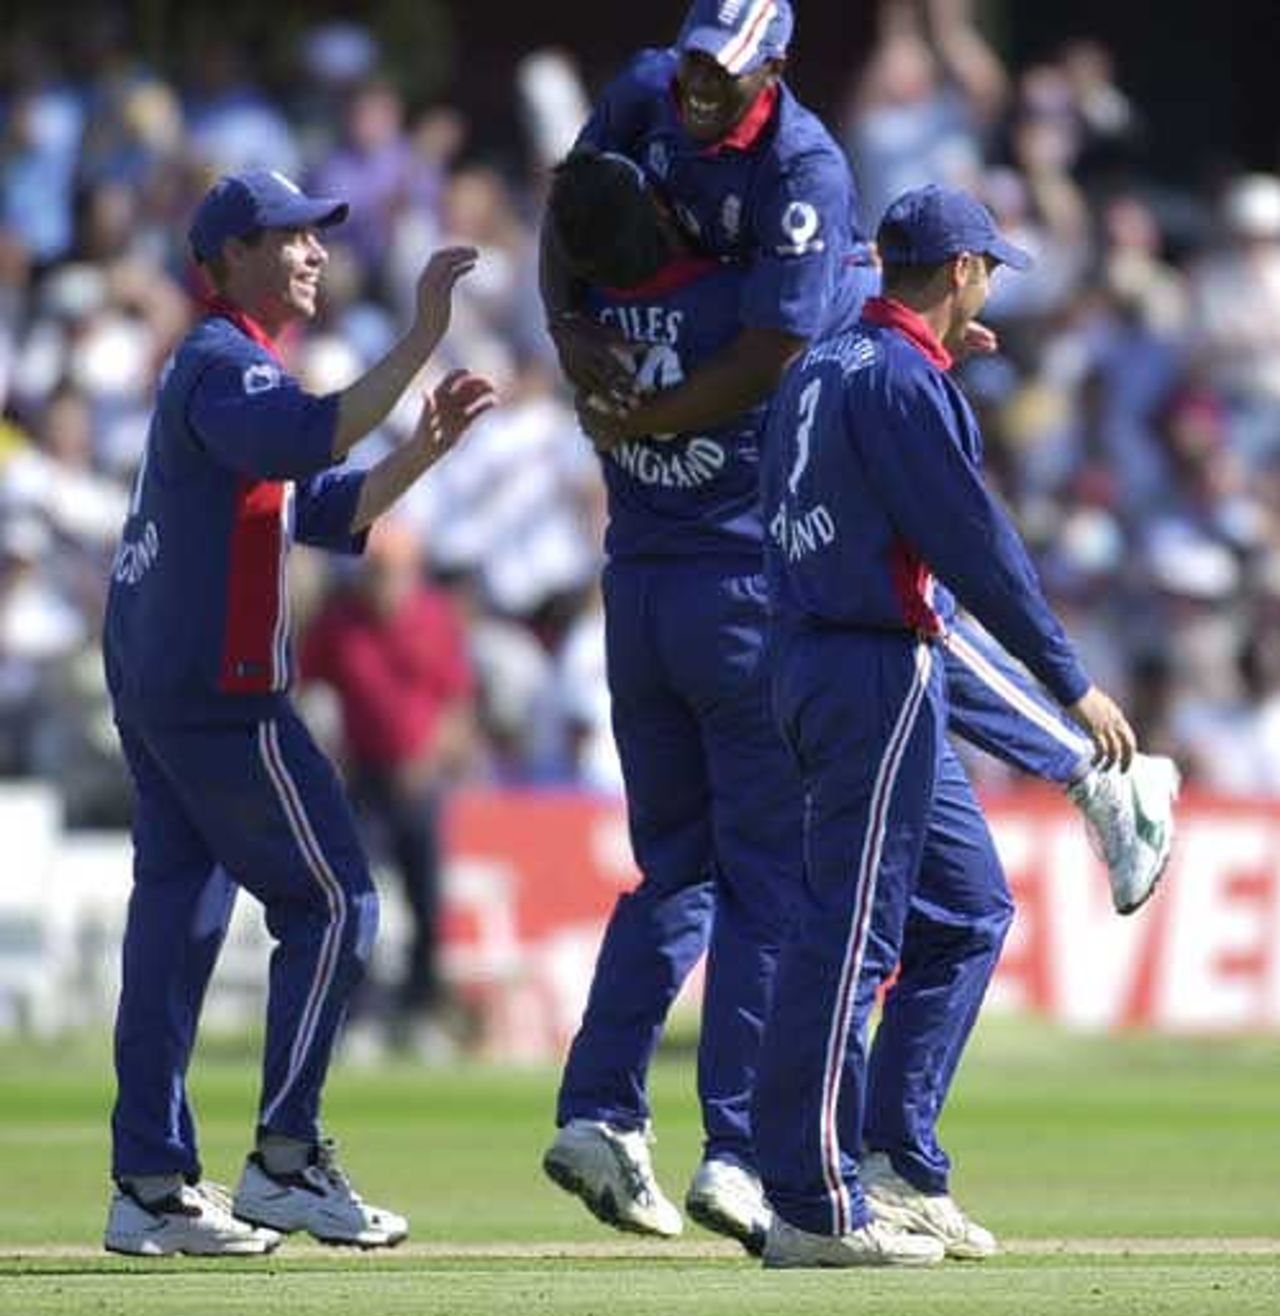 Tudor and Giles celebrate the wicket of Tendulkar at the NatWest final, Lords 2002